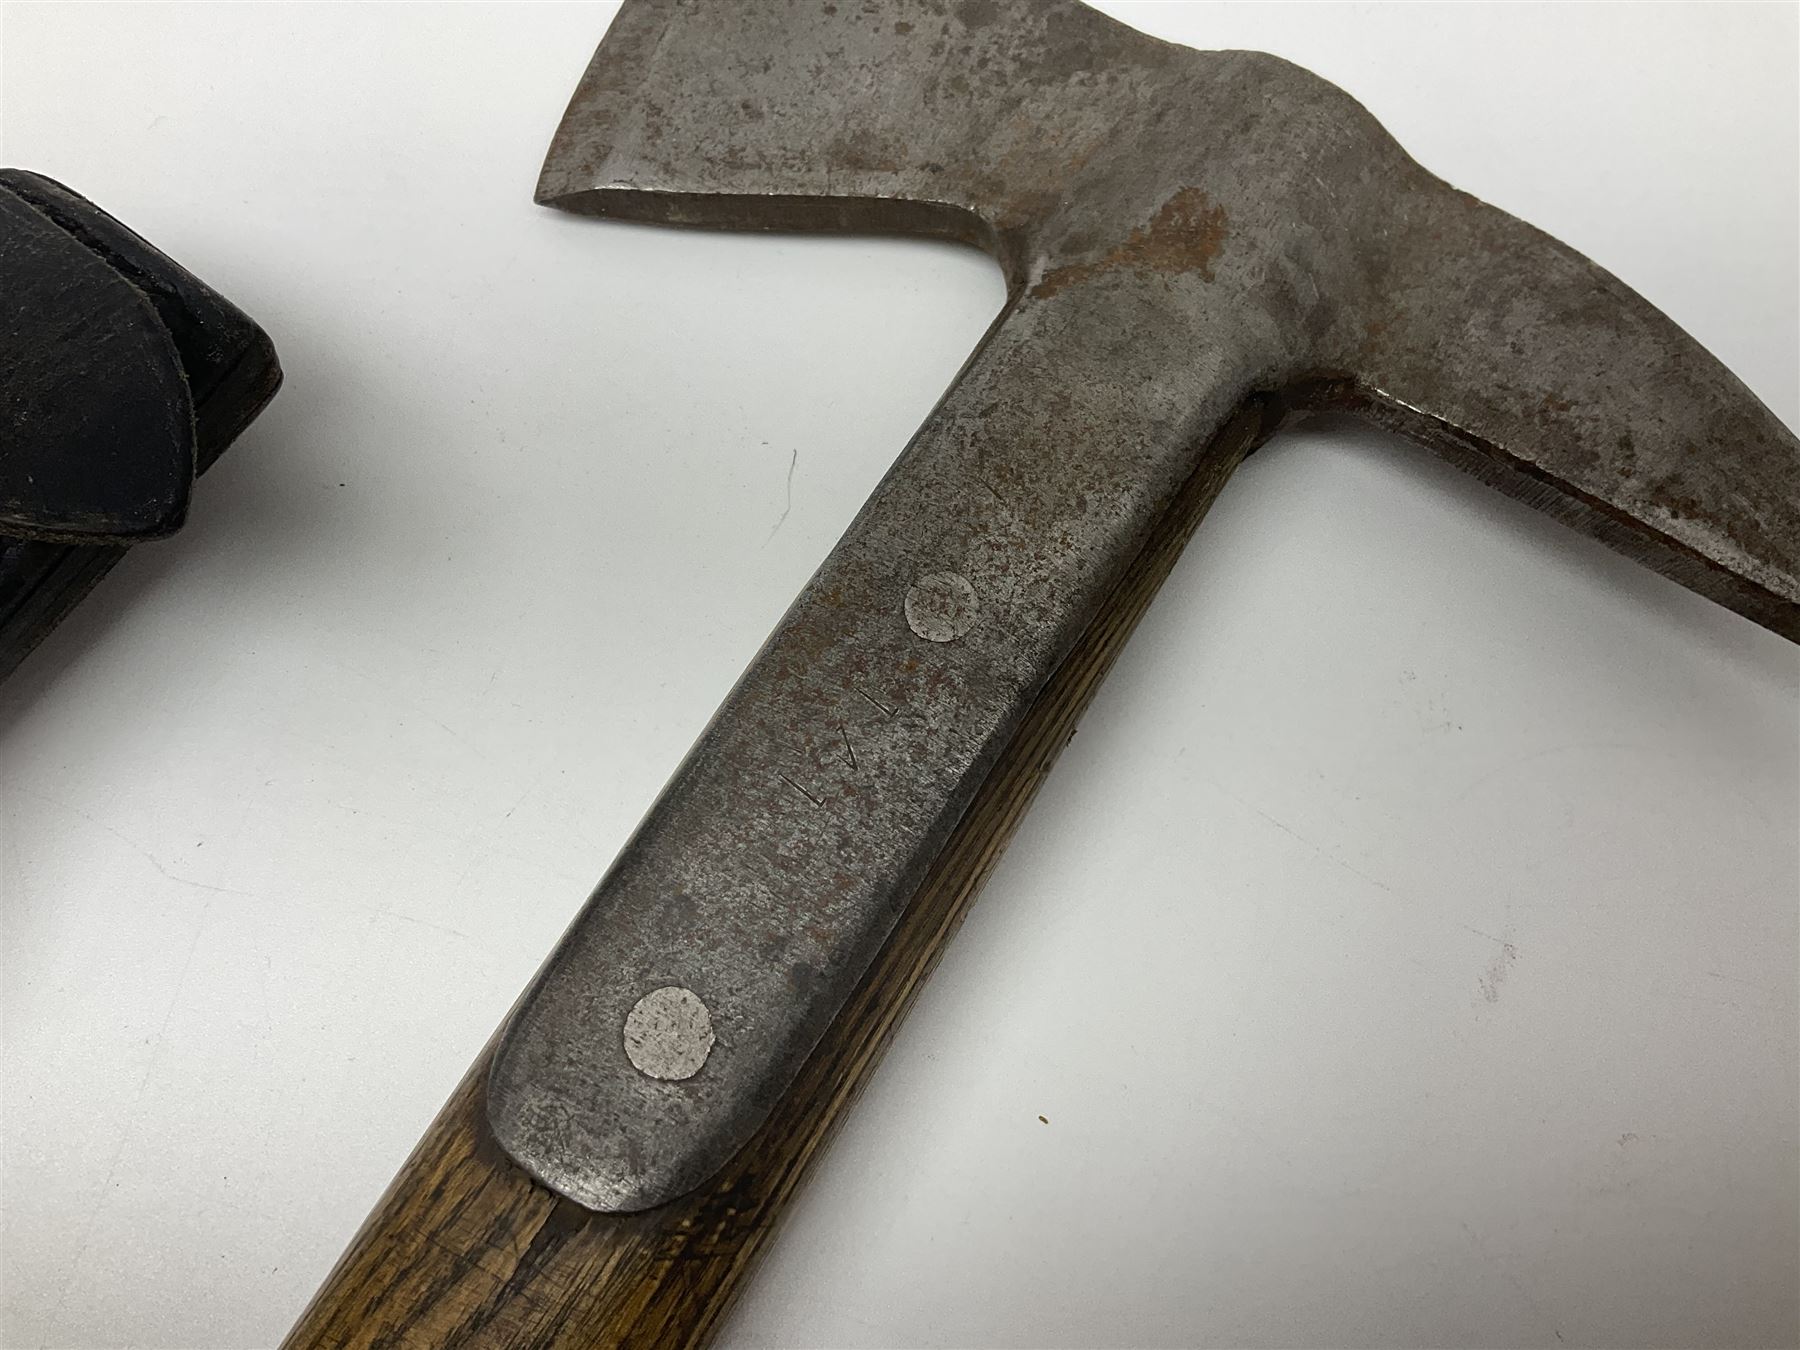 Post-War military type fireman's axe impressed 'PERKS 1953/54' with additional indistinct mark proba - Image 8 of 19